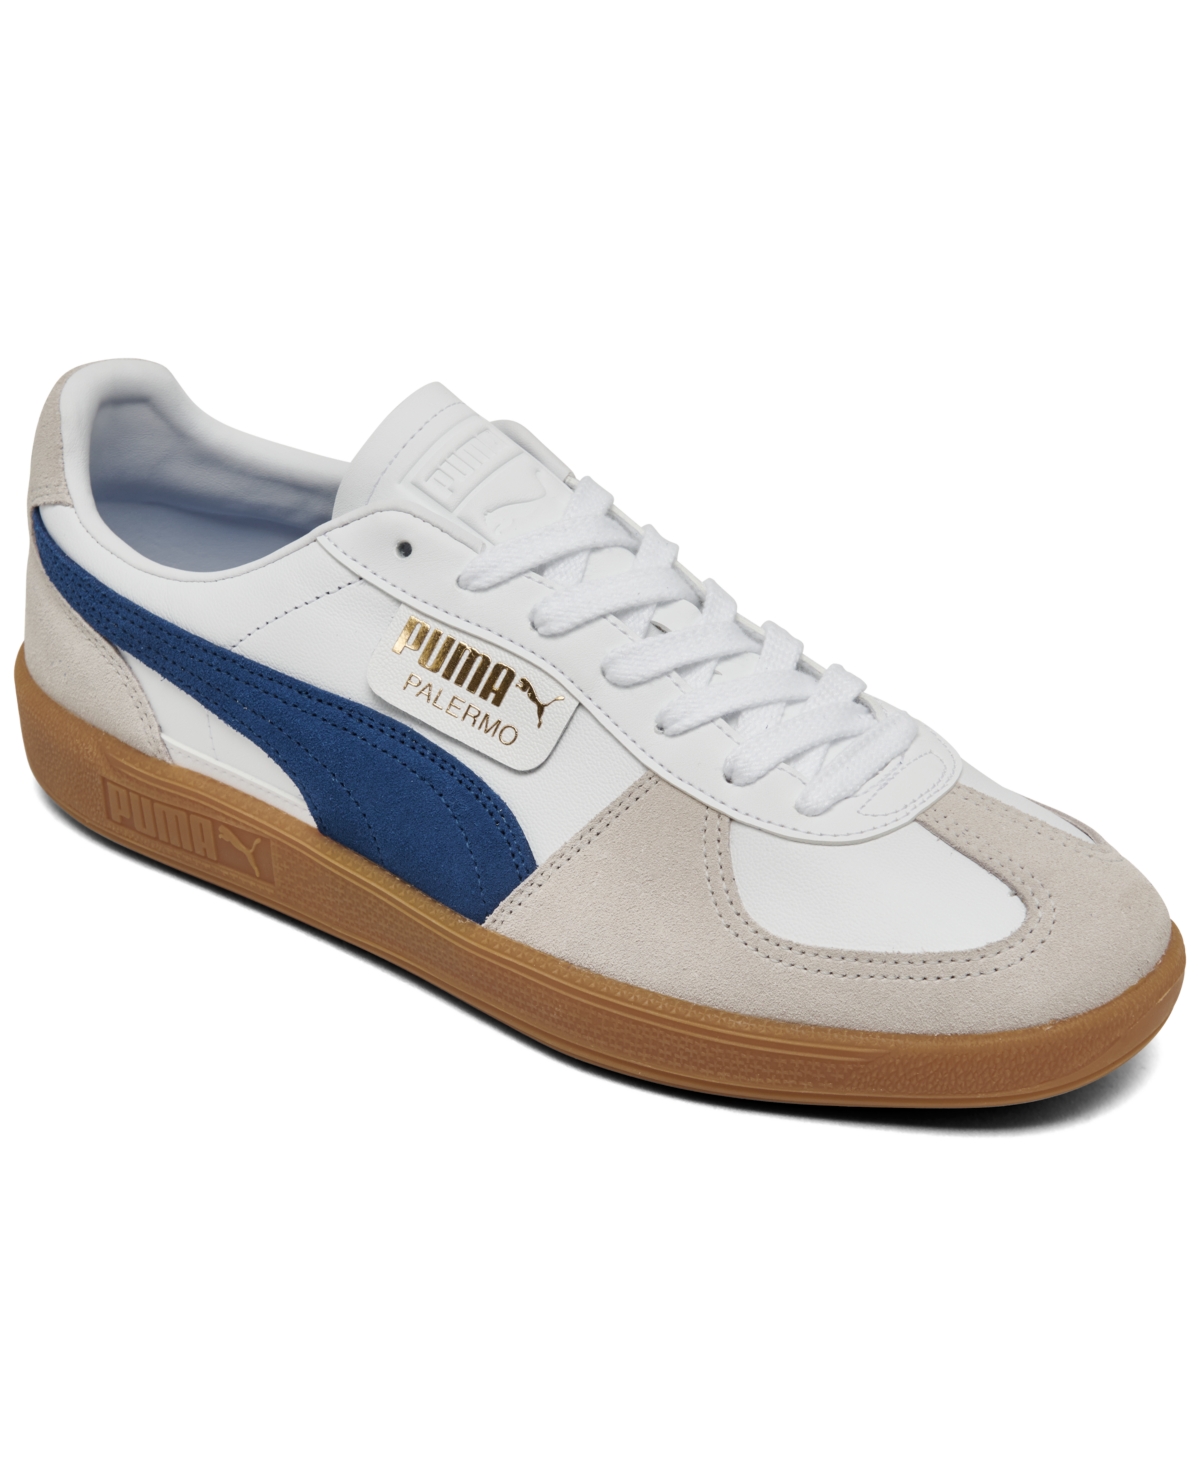 Men's Palermo Leather Casual Sneakers from Finish Line - WHITE/BLACK/GOLD